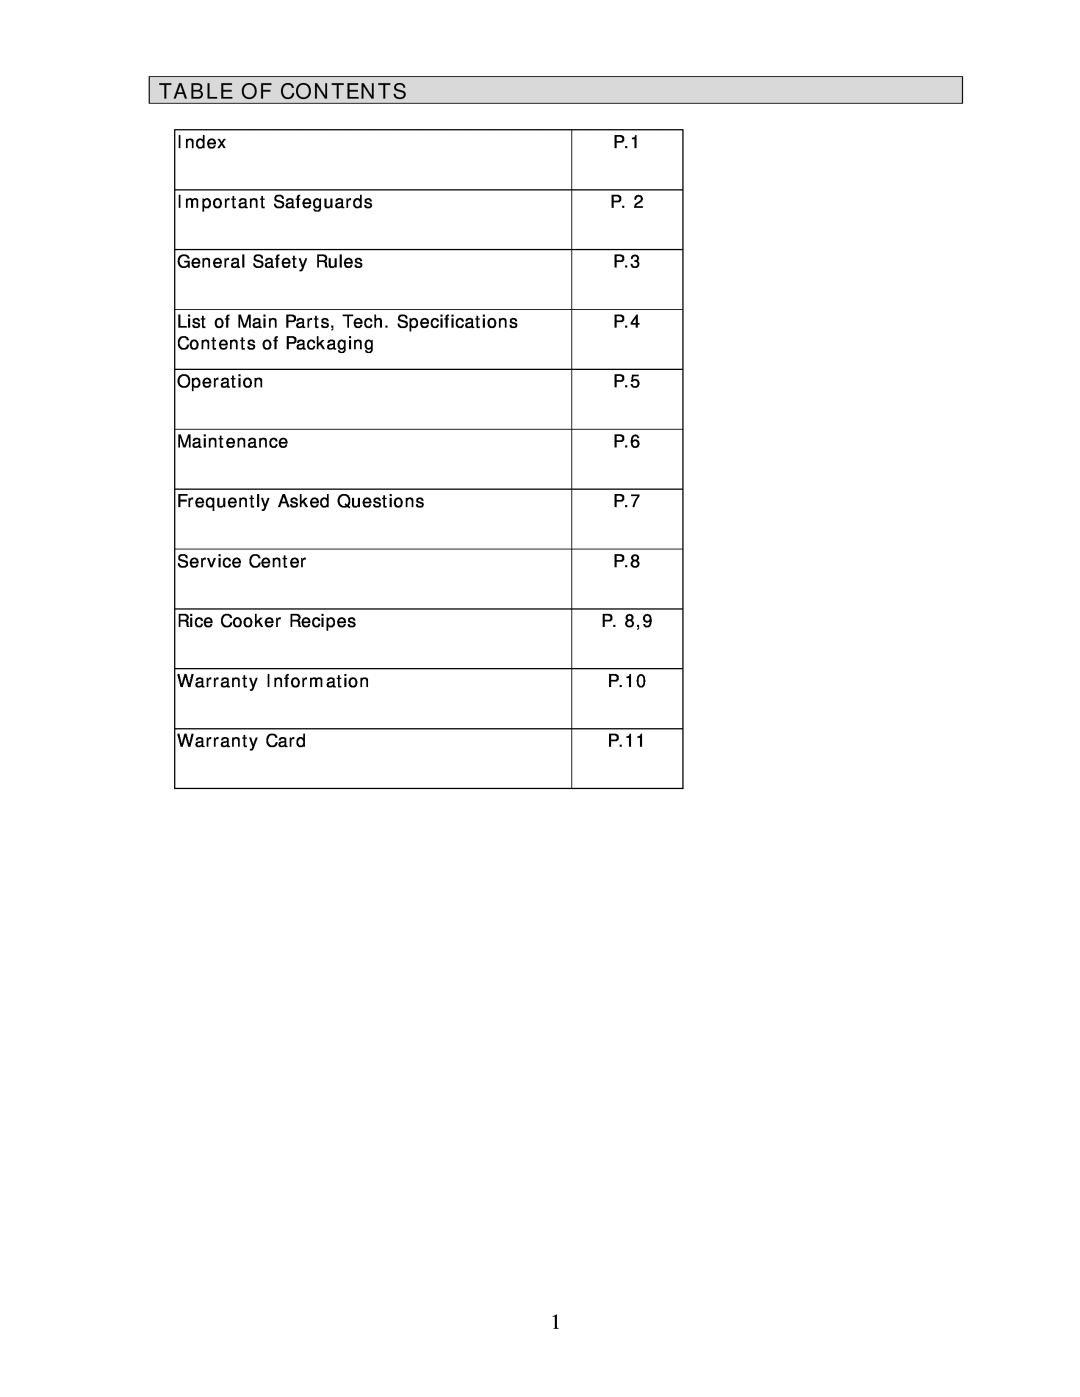 Wachsmuth & Krogmann RC-3 manual Table Of Contents 